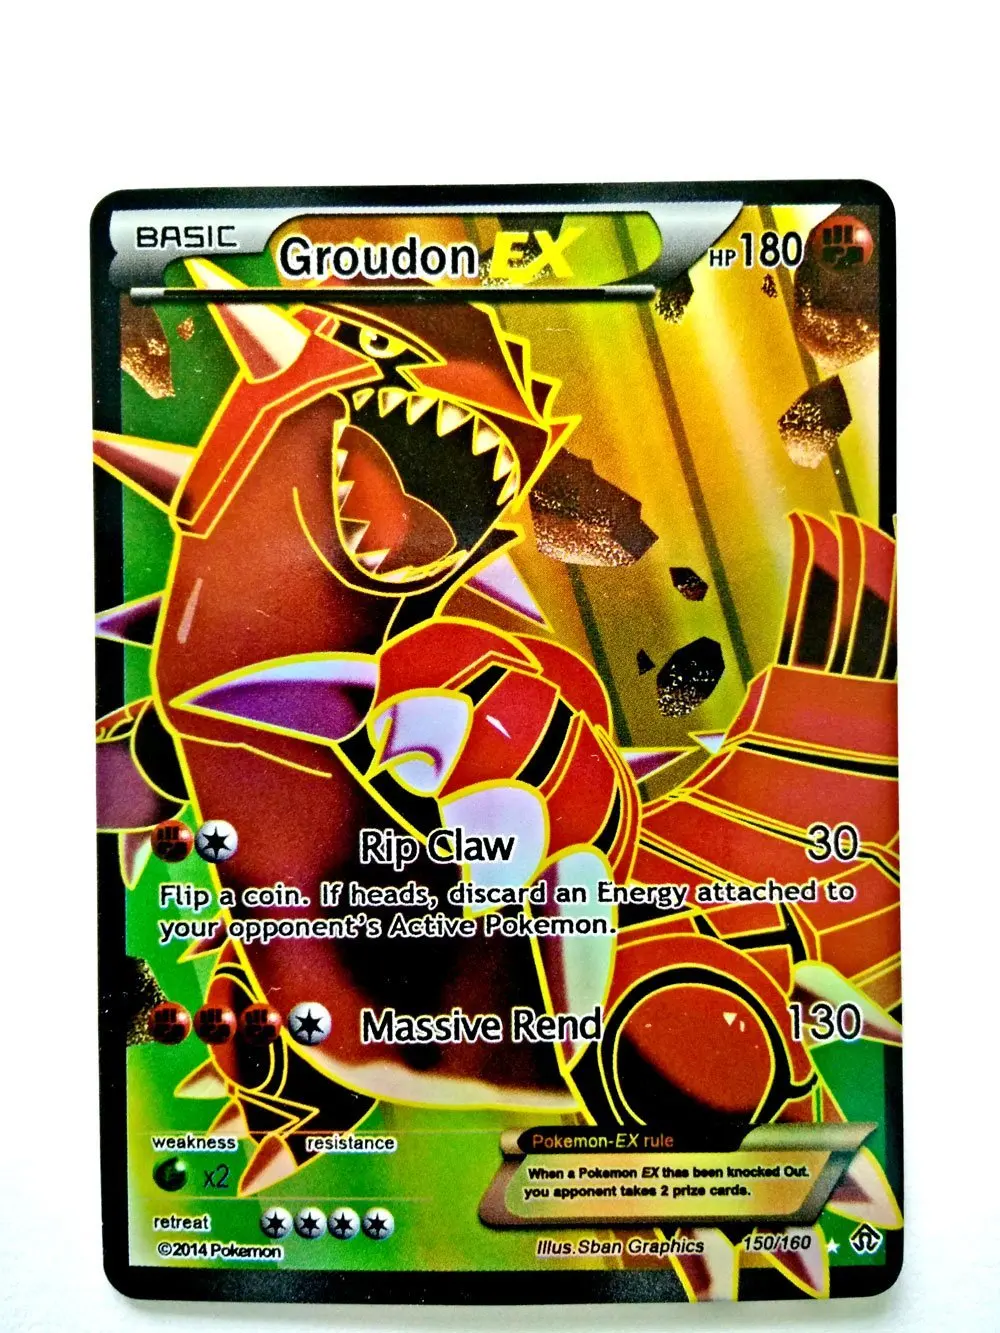 Cheap Gold Pokemon Cards Price, find Gold Pokemon Cards Price deals on line at Alibaba.com